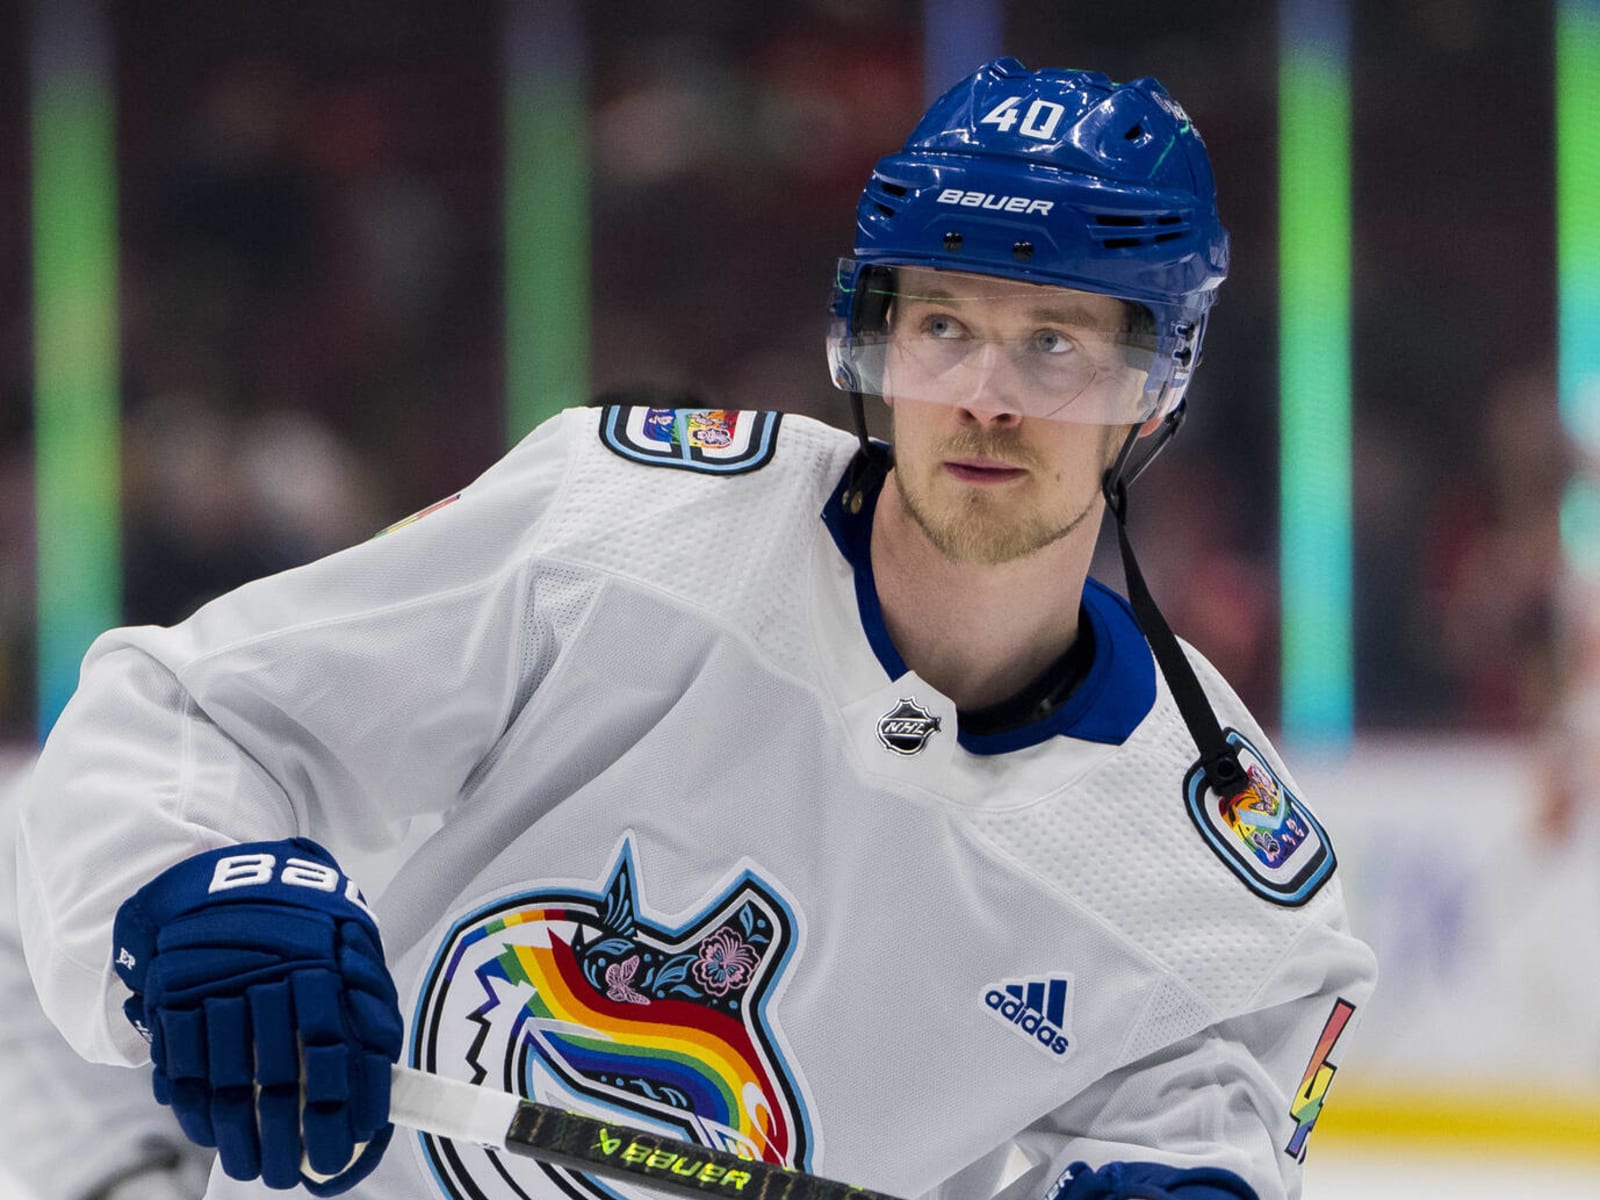 Elias Pettersson not in rush to sign contract extension with Canucks